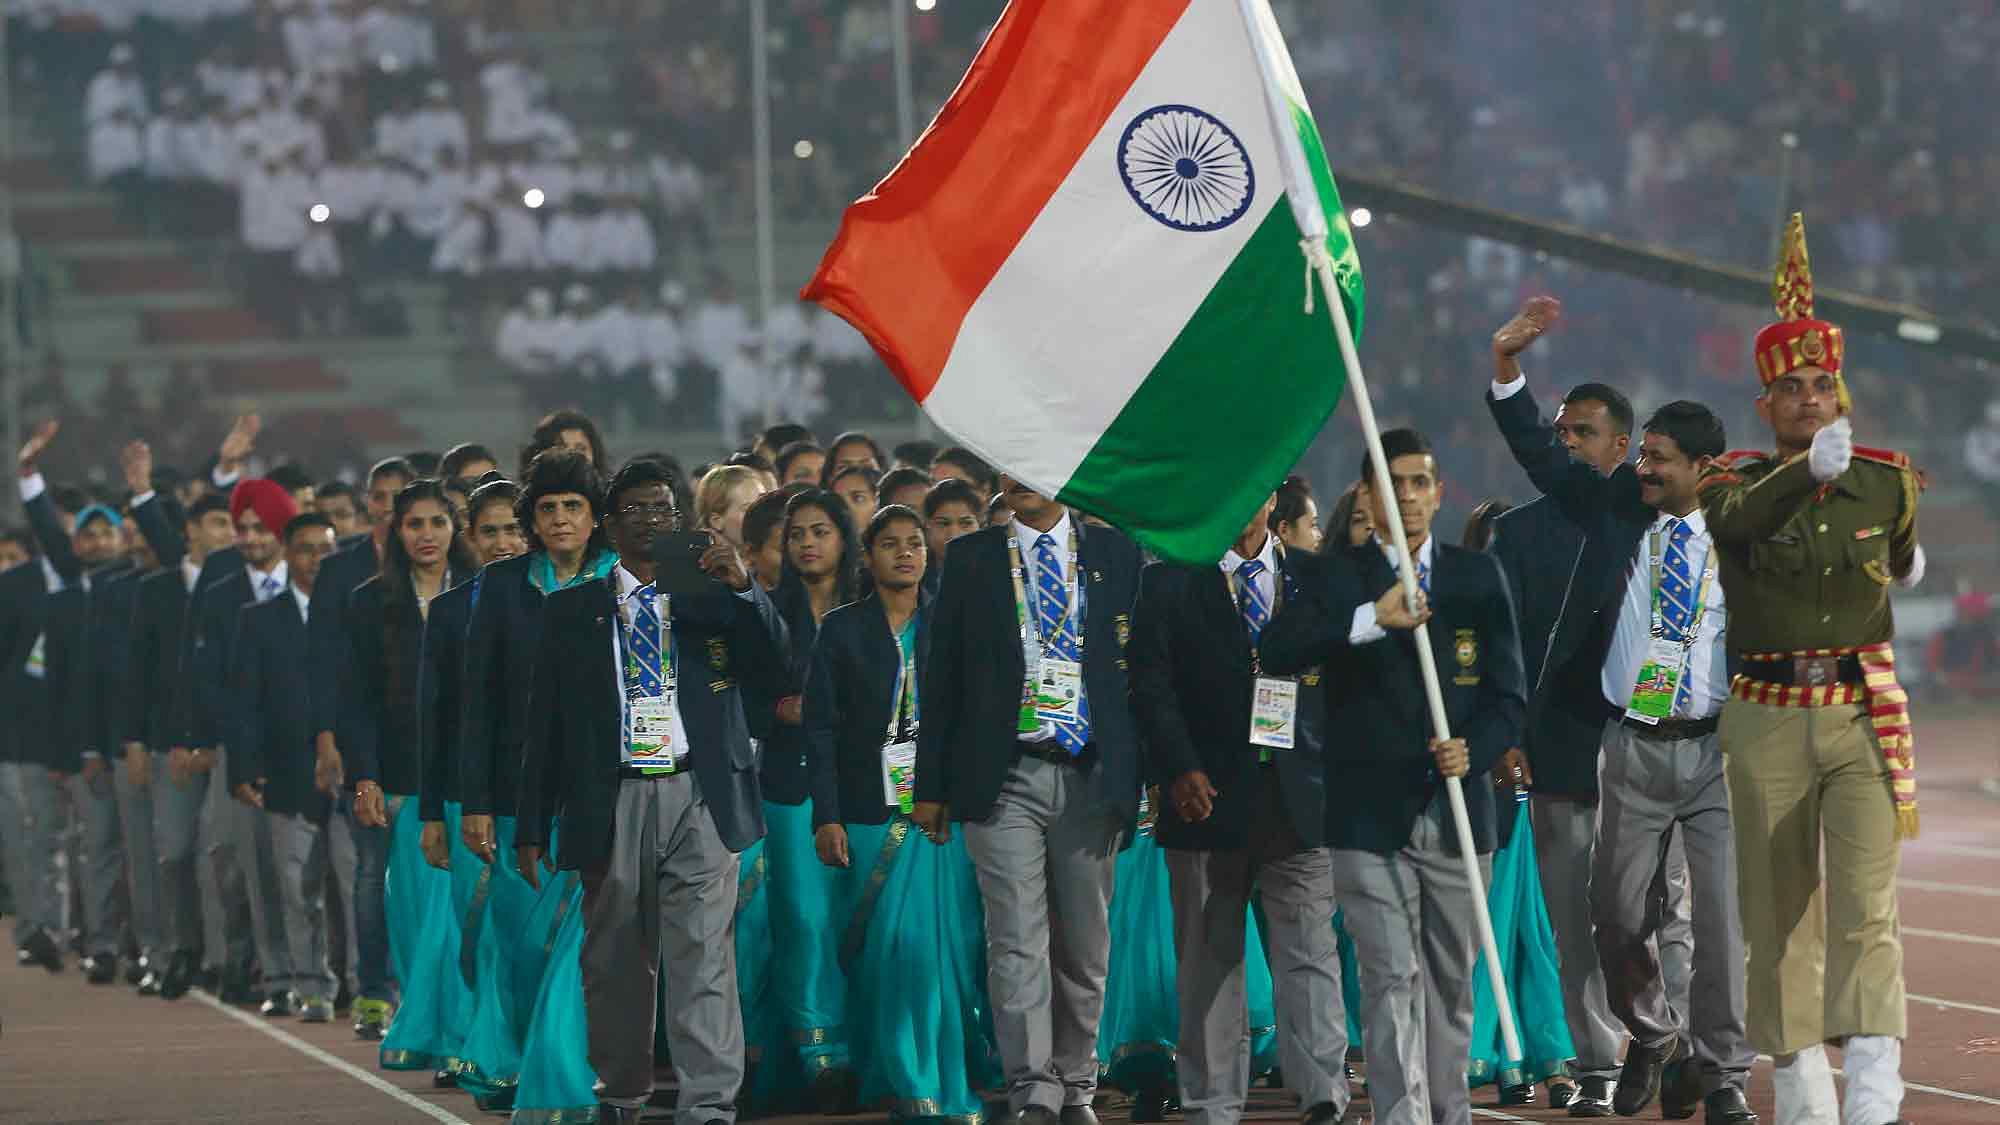 The author, Saurav Ghosal, was the flagbearer for India at the opening ceremony of the South Asian Games. (Photo: AP)